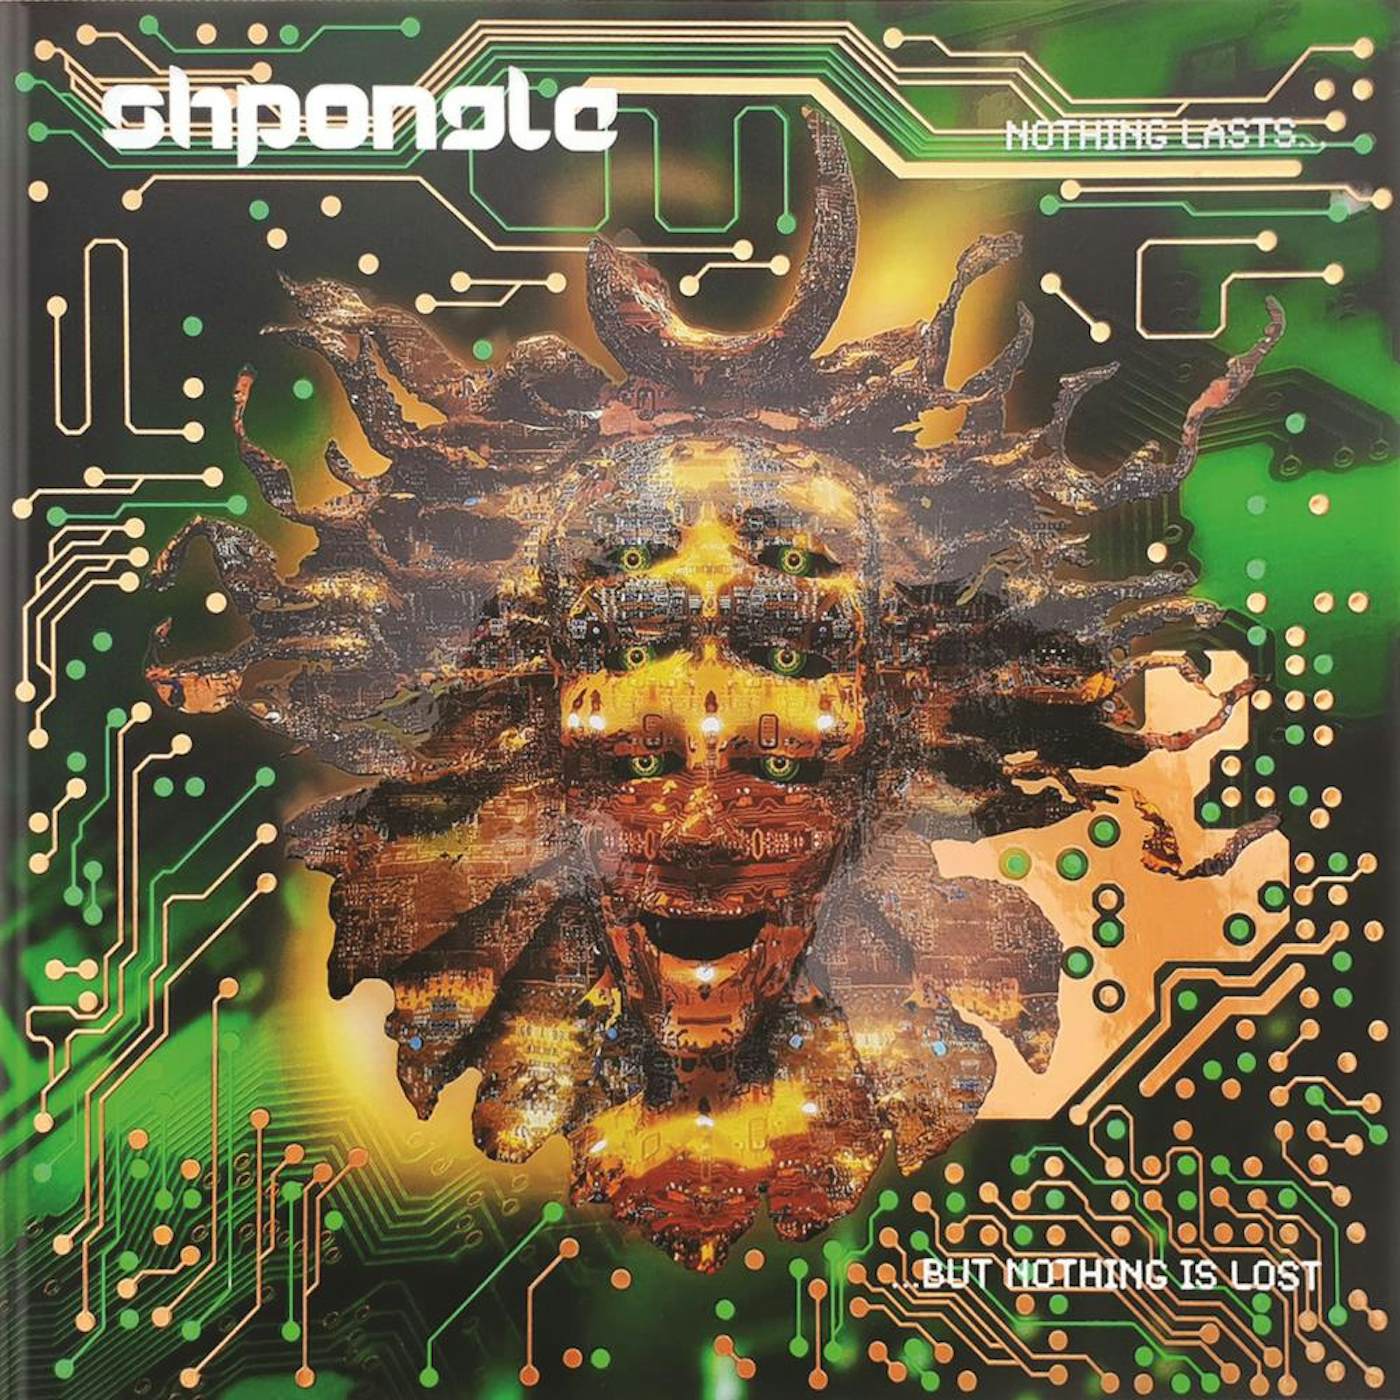 Shpongle NOTHING LASTS BUT NOTHING IS LOST Vinyl Record